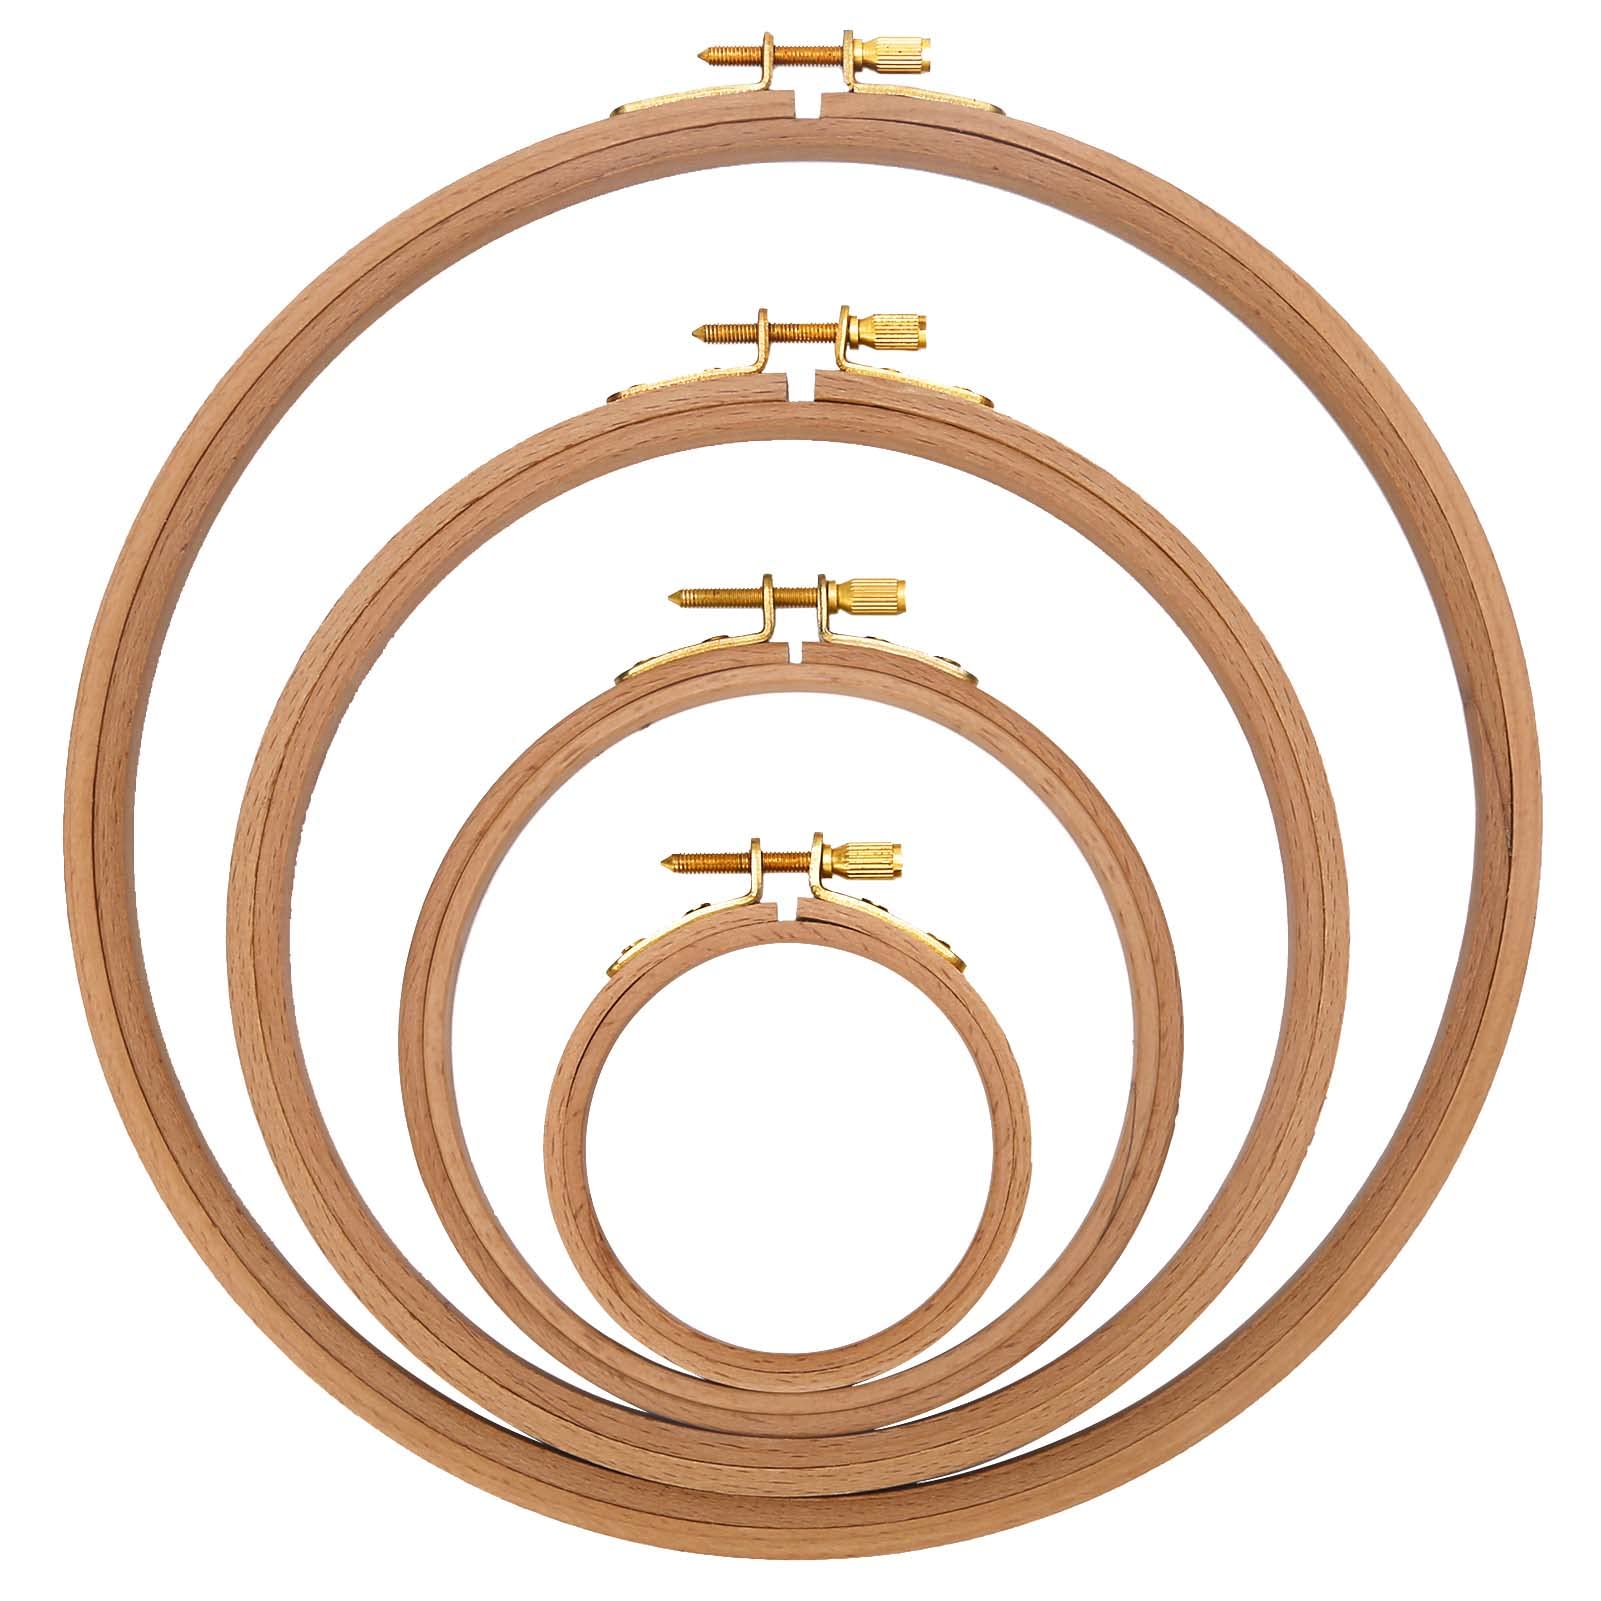 Caydo 4 Pieces Beech Wood Embroidery Hoops Set, 3 inch to 9 inch Cross  Stitch Hoop Ring for Embroidery, Cross Stitch, Needlework, Art Craft Handy